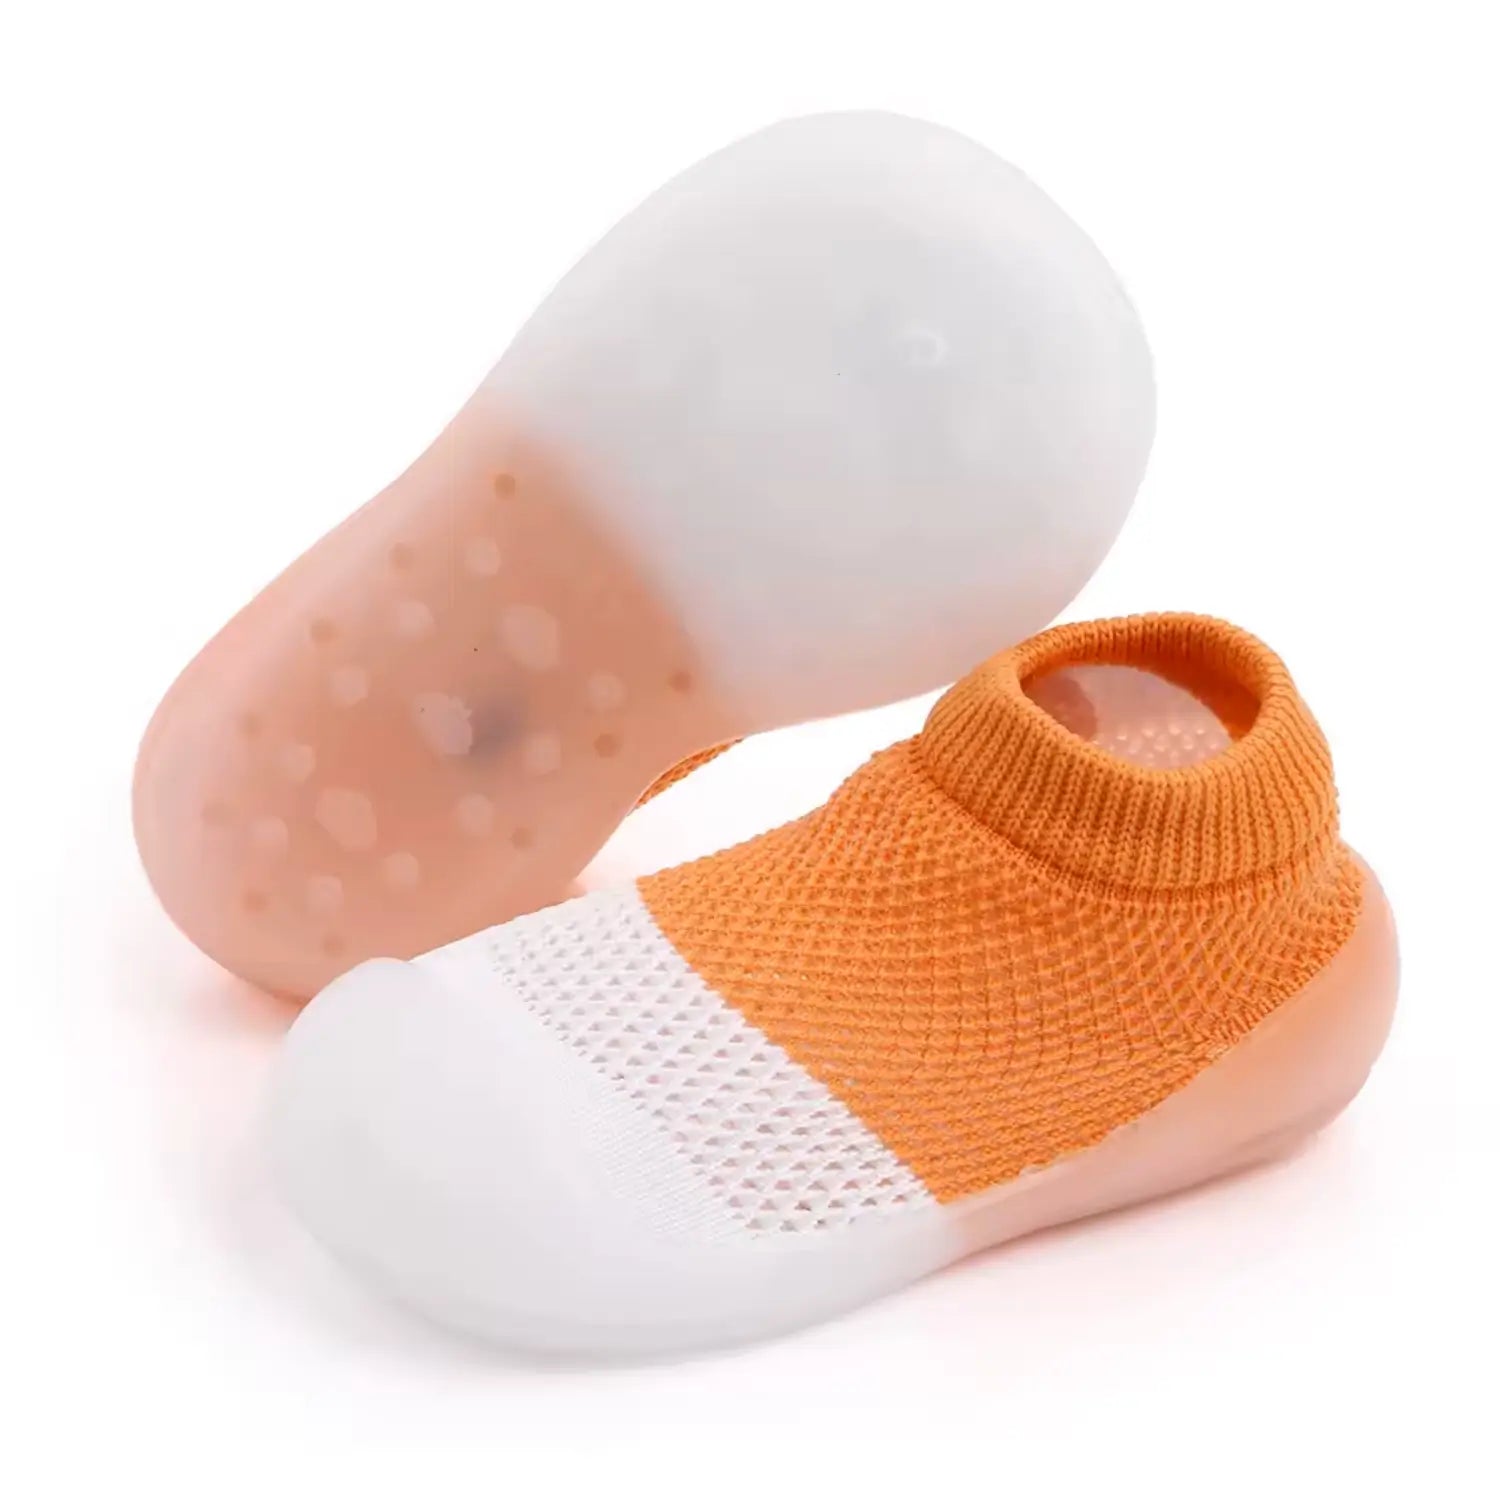 Purestep Mini's - Barefoot Shoes for Babies and Toddlers